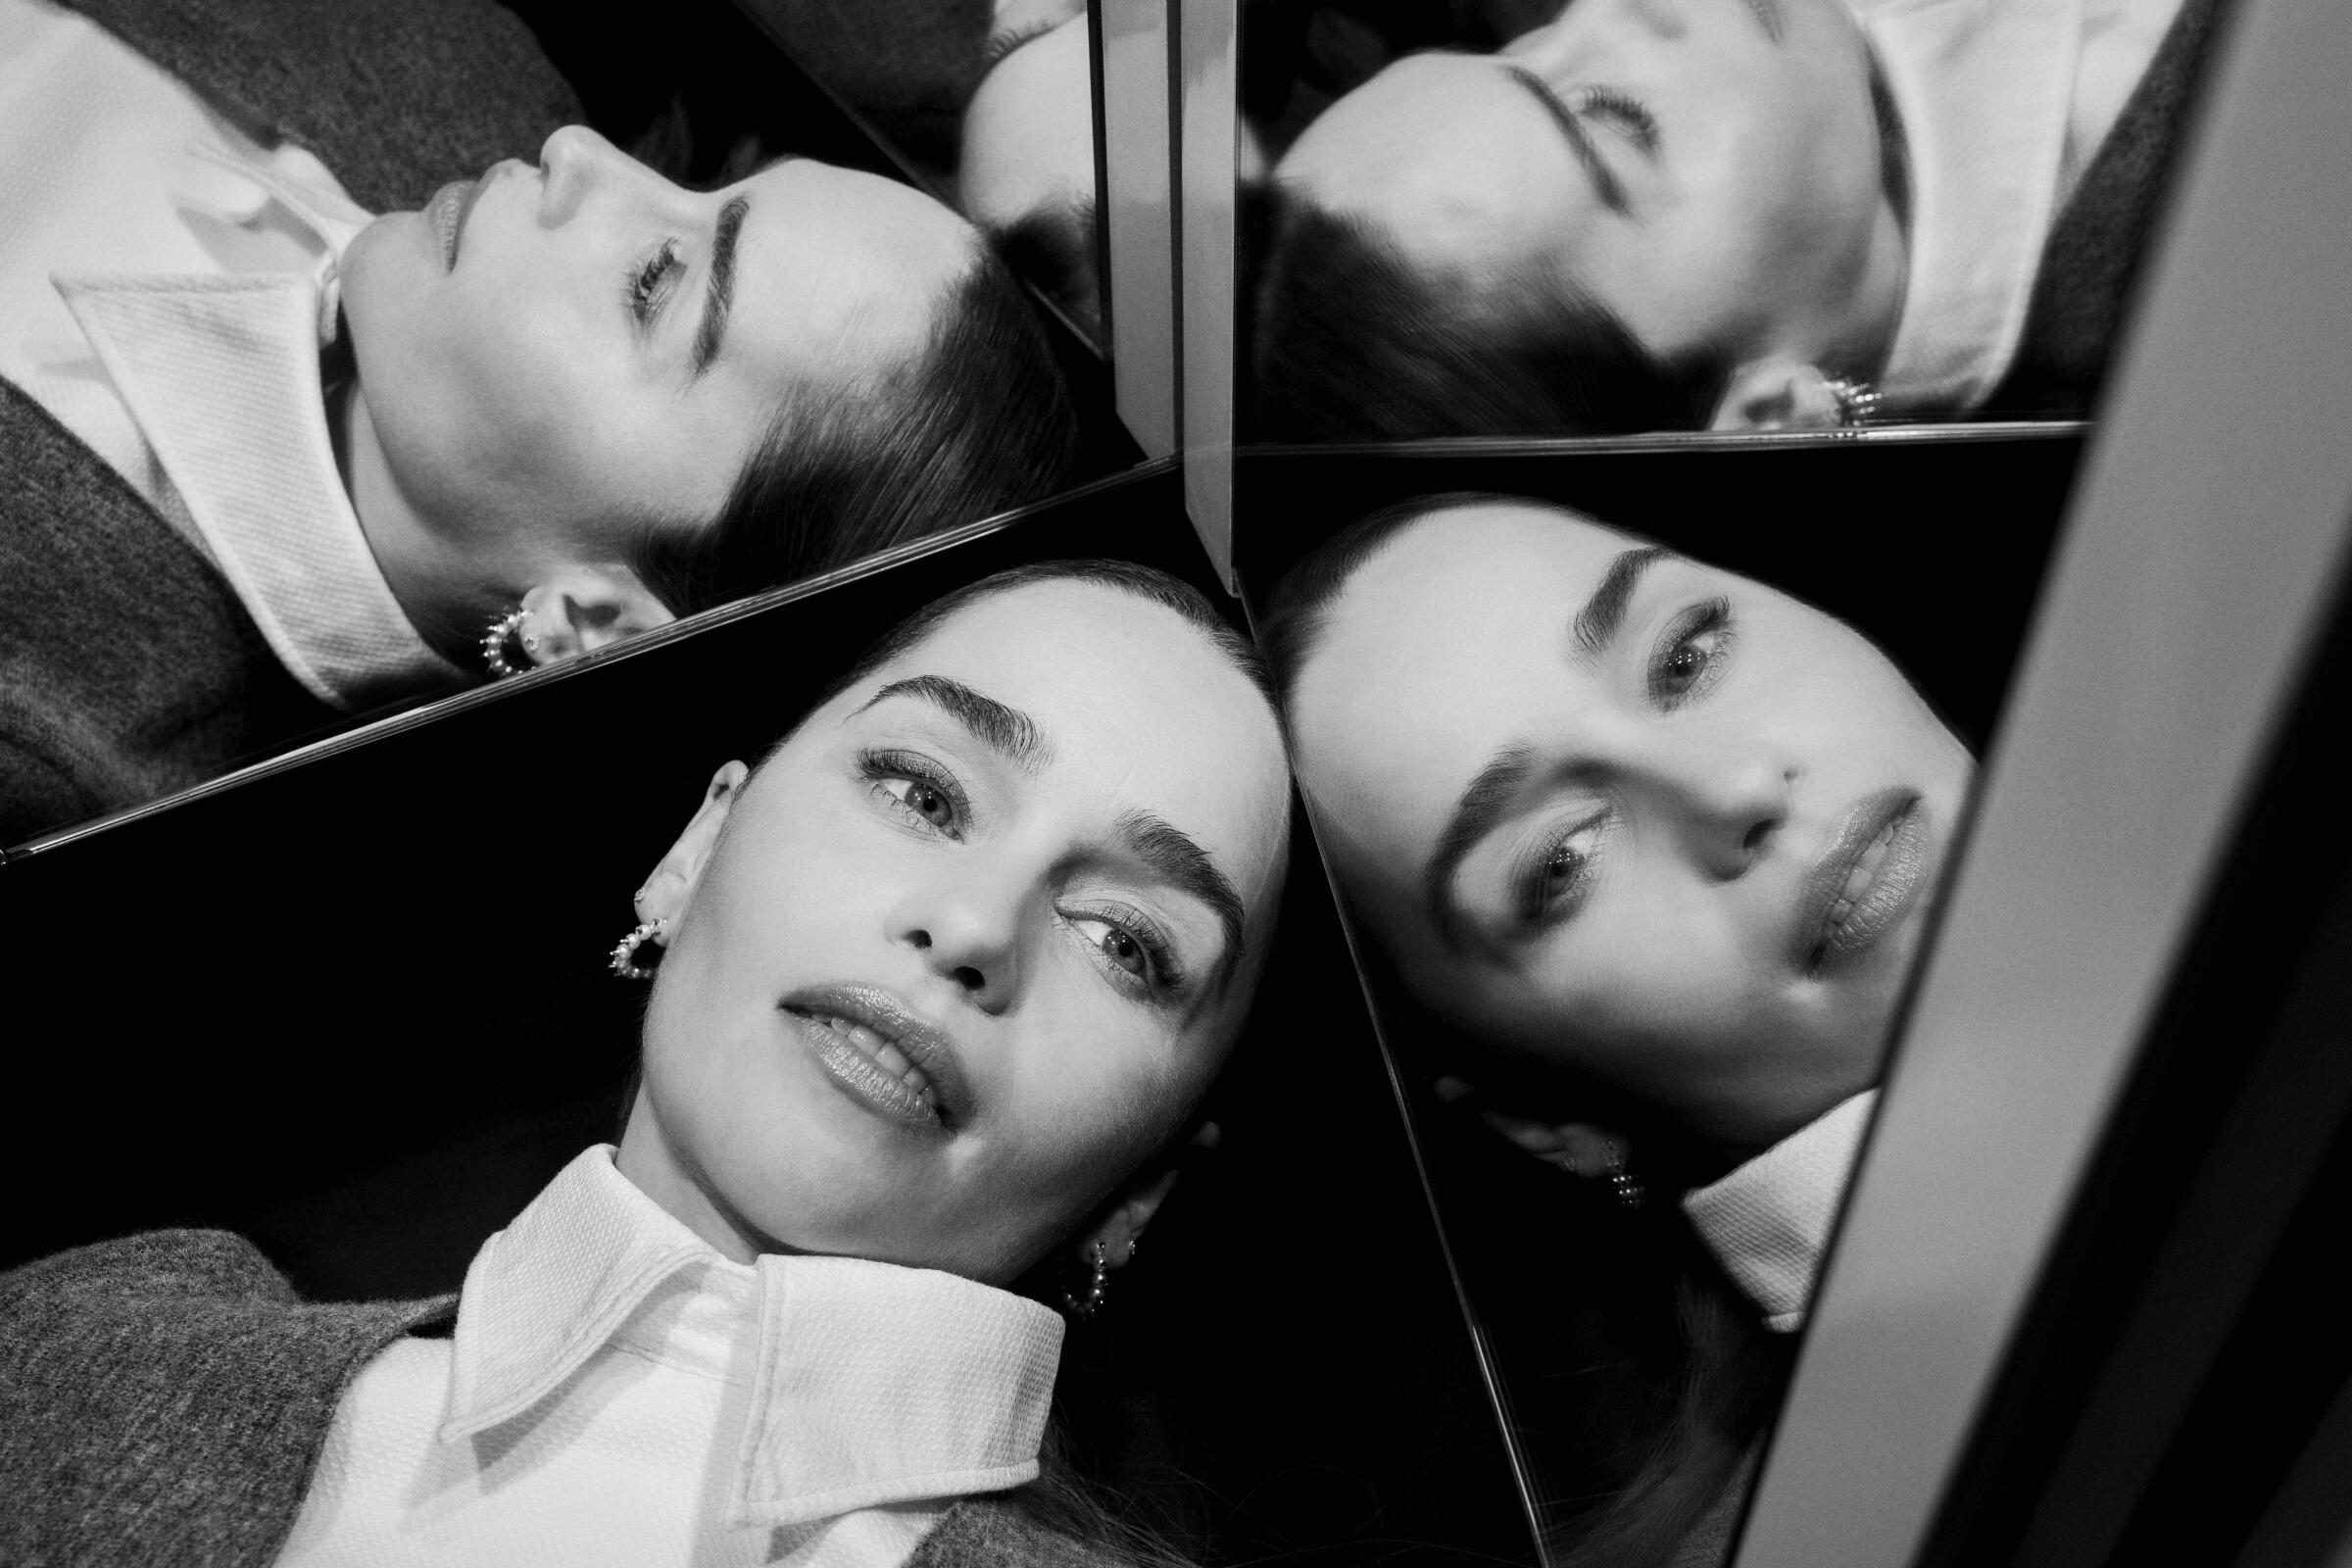 Emilia Clarke surrounded by her reflection in mirrors